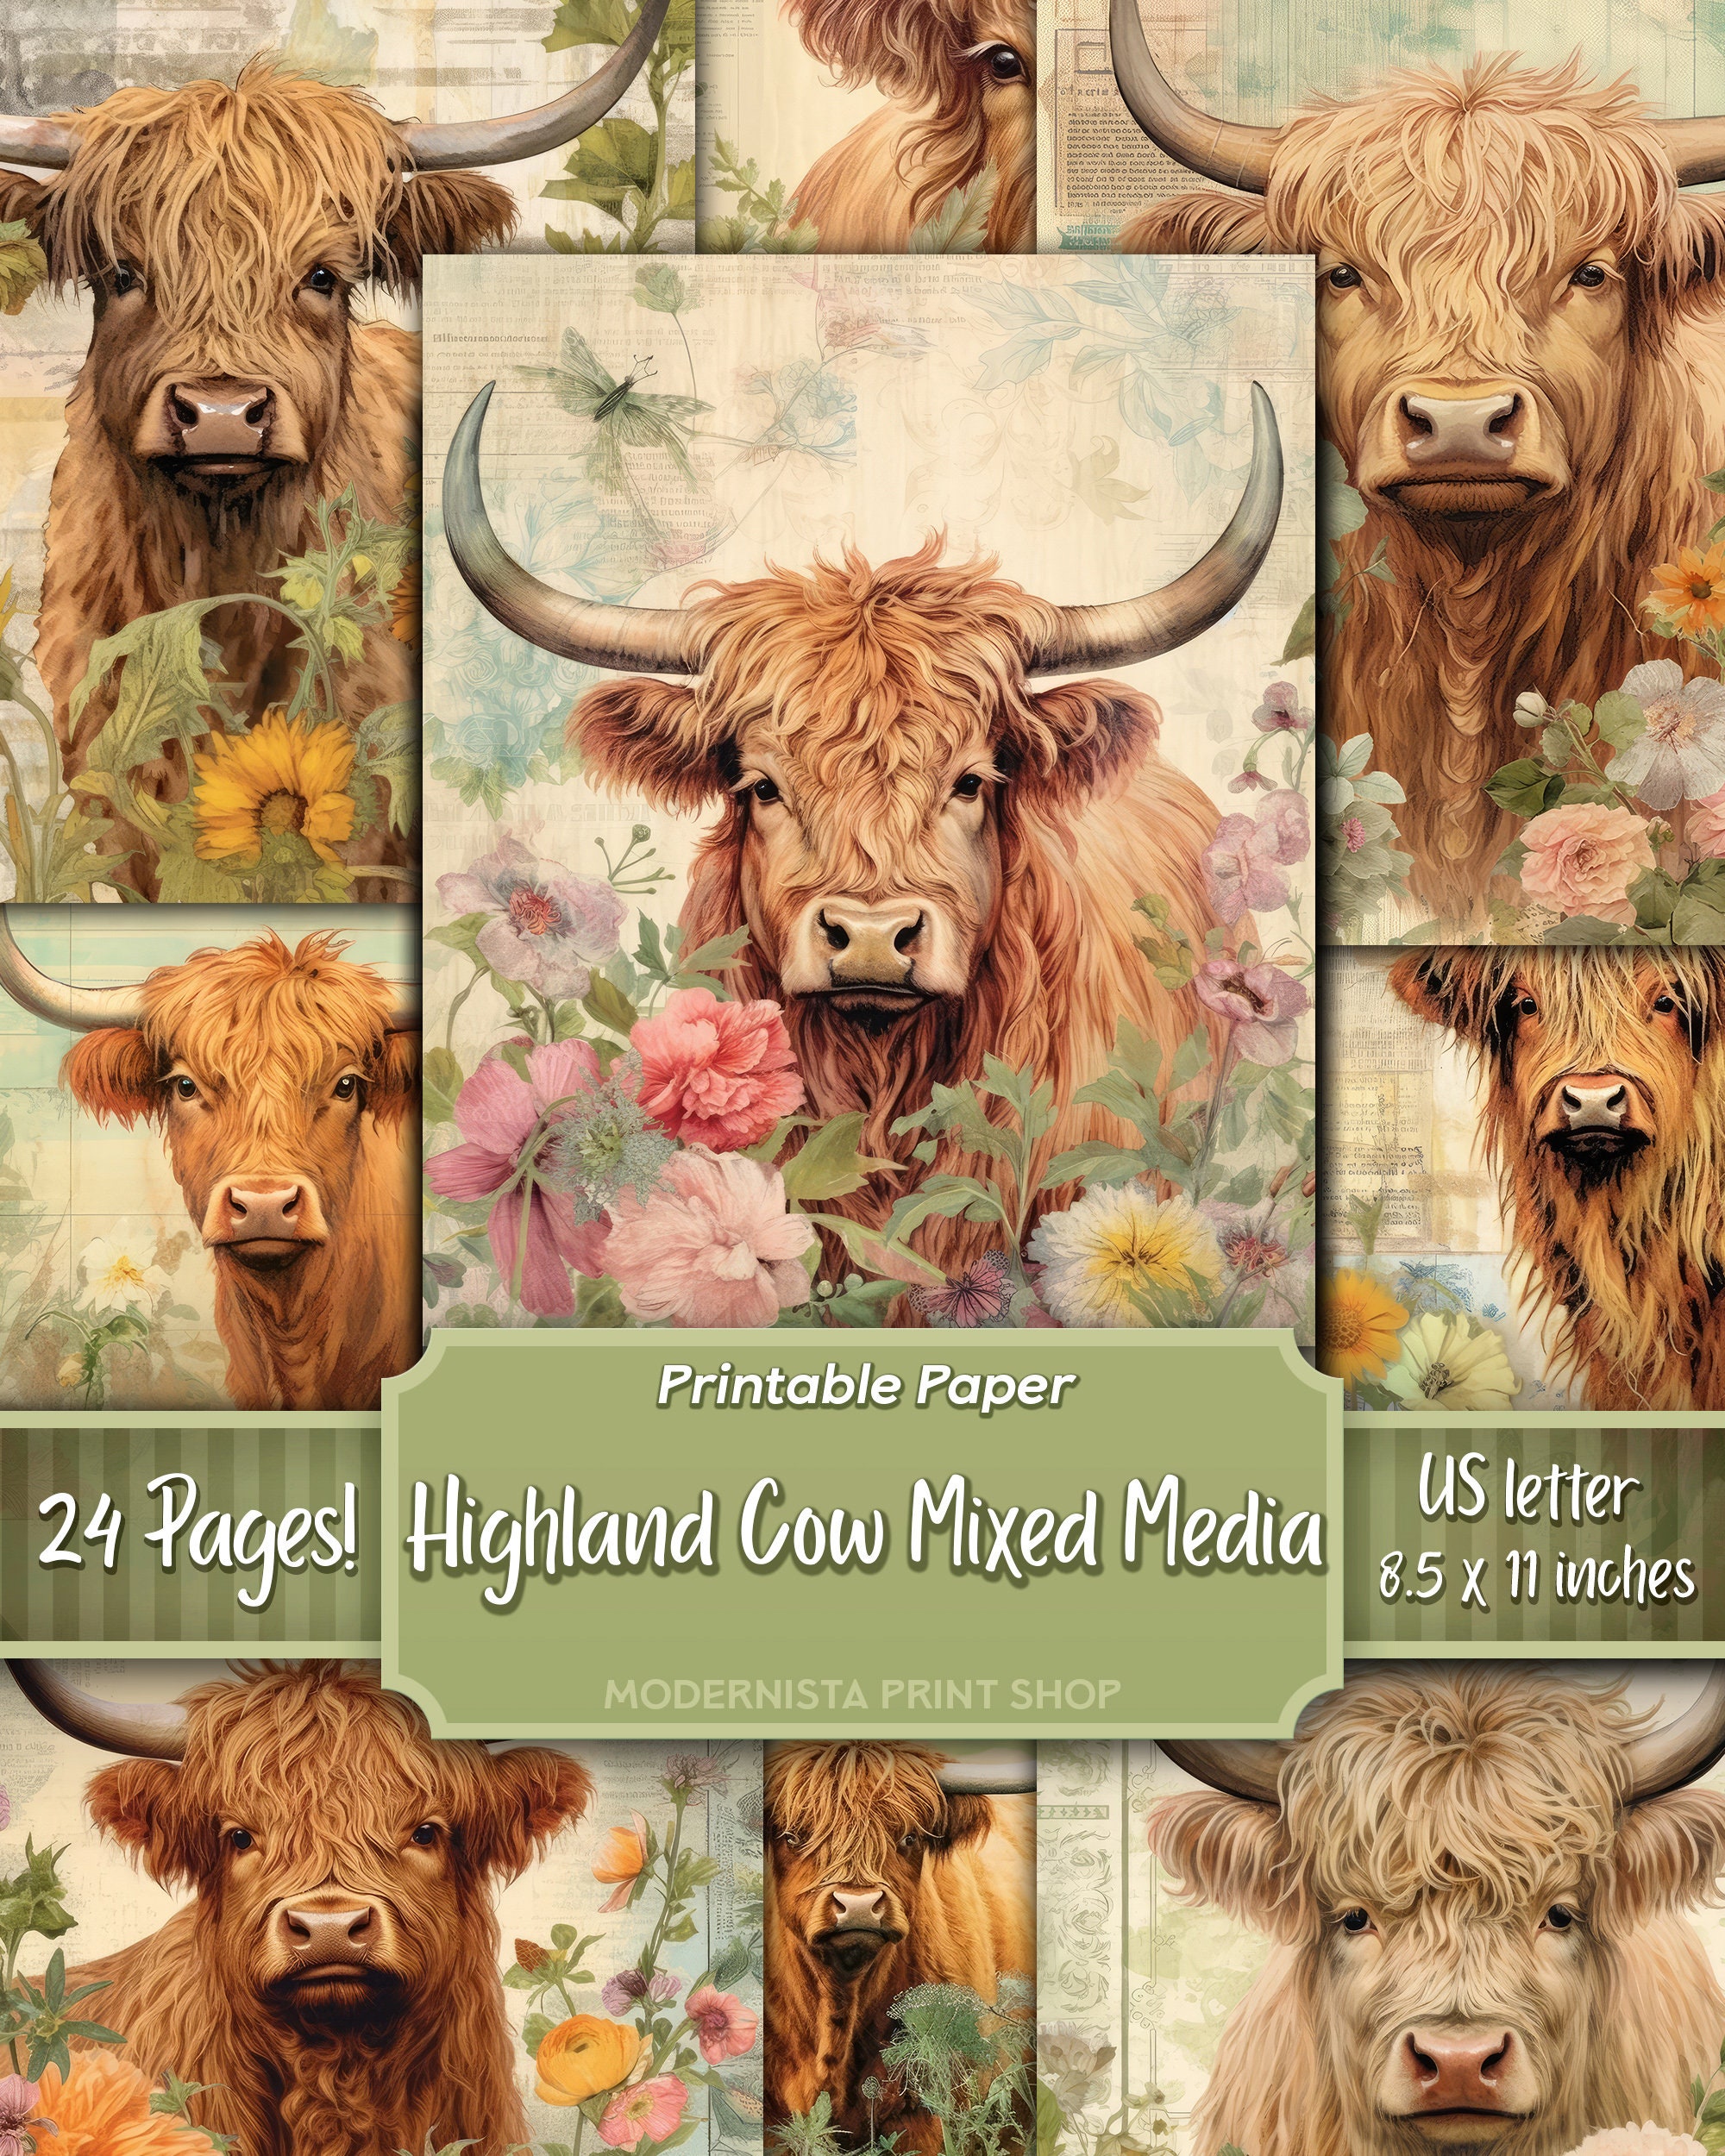 Animal Scottish Highland Cow Latch Hook Pillow Kit for Adults DIY Throw  Pillow Cover with Printed Canvas Crochet Yarn Needle Craft Easy Handmade